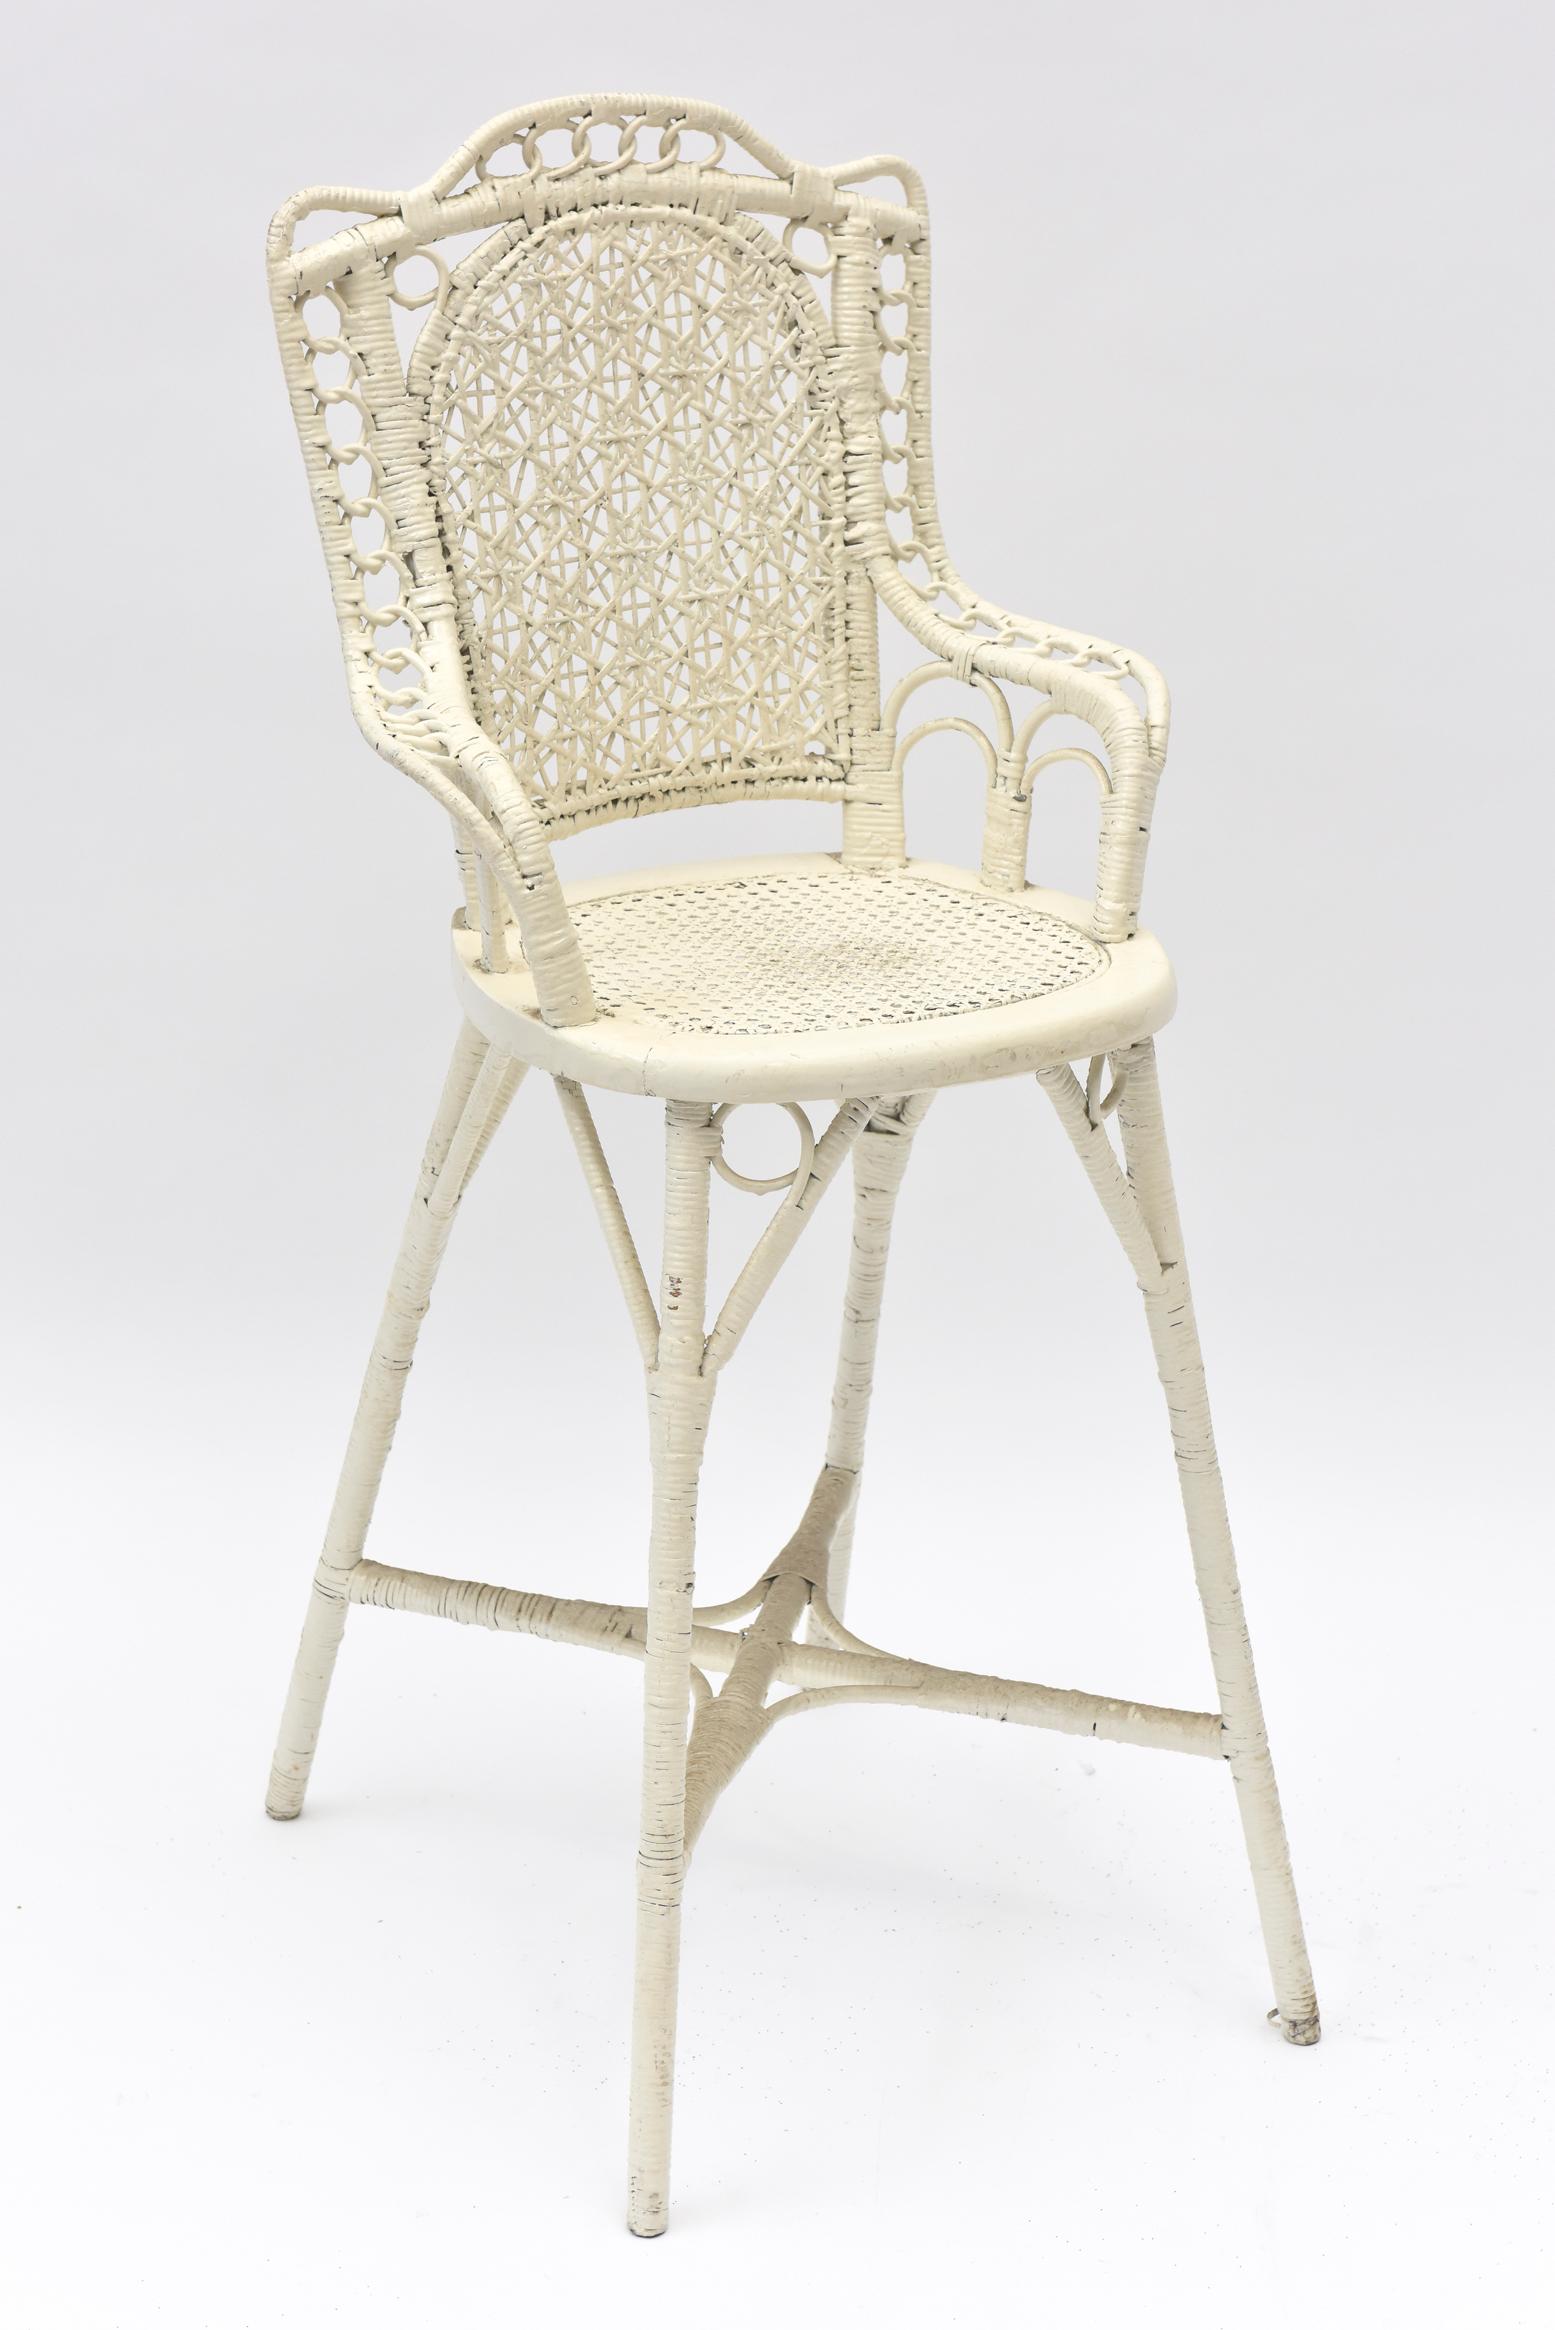 This Victorian Youth high chair has a spider woven back, cane seat and interlocking wicker circles on its arms. A product of the mid 19th century, few survived. This one was tenderly rewoven in the 1970s by a man who was deaf, dumb and blind, yet a